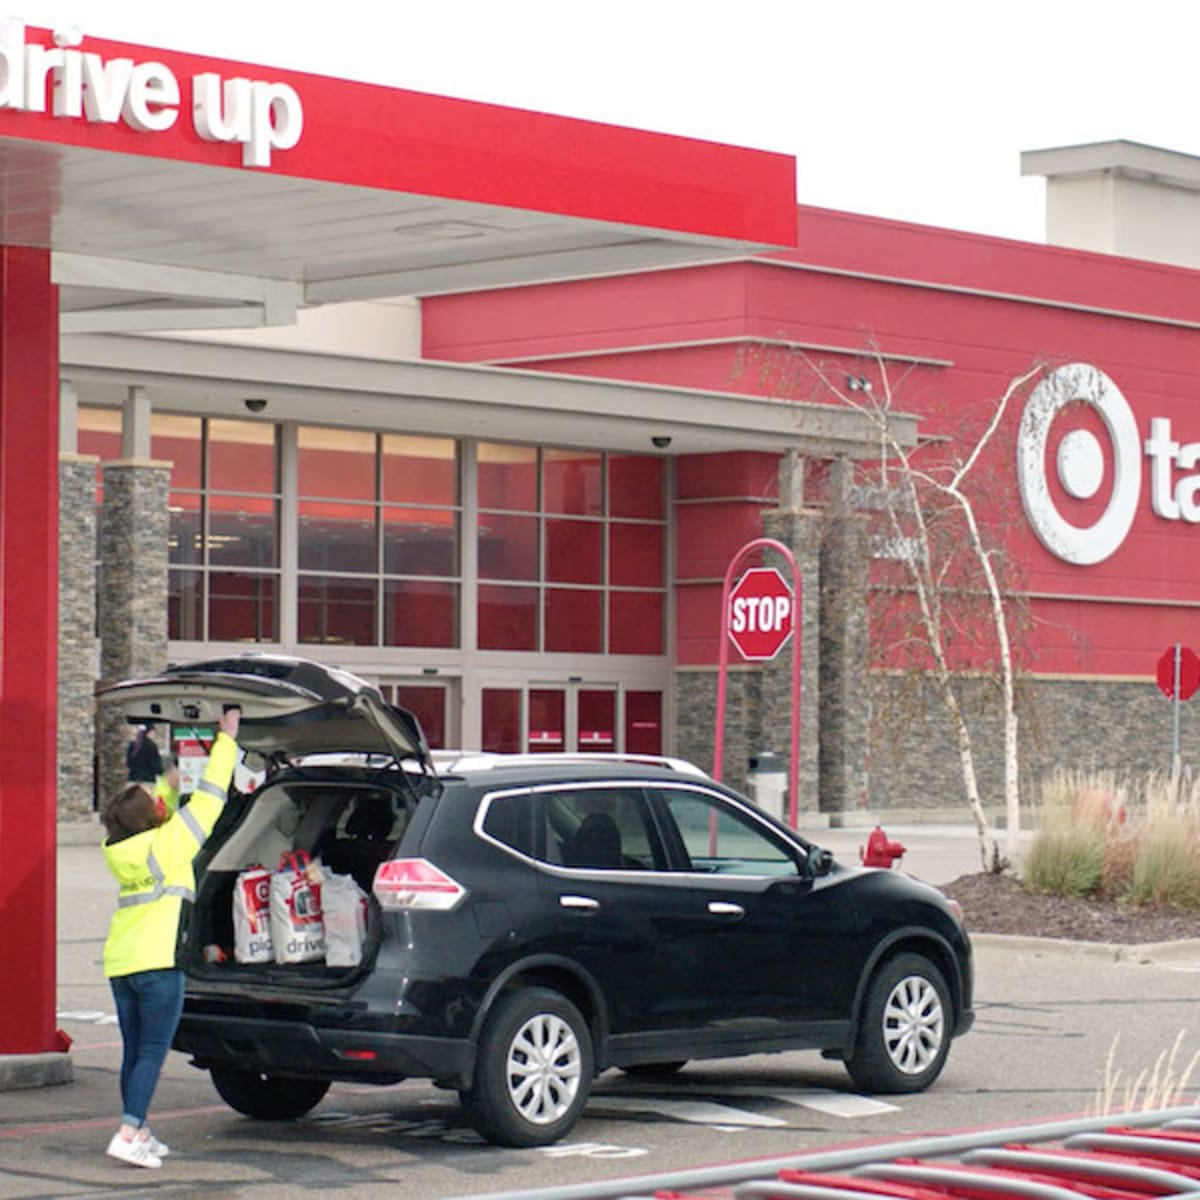 Target's new shopping service delivers, at a price